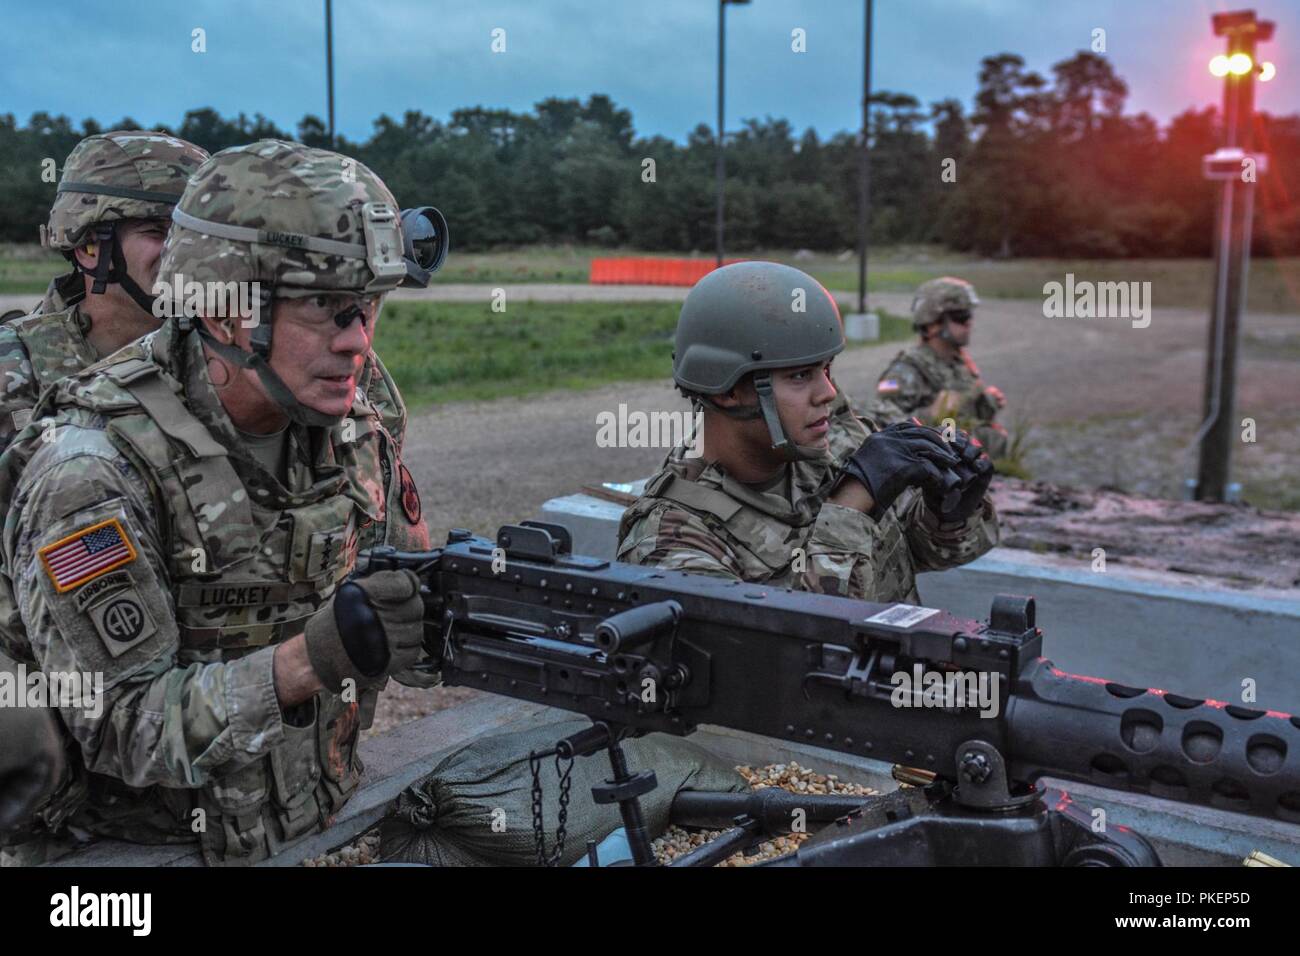 LTG Charles D. Luckey, Chief of Army Reserve and Commanding General, U.S. Army Reserve Command, fires an M2 machine gun during Task Force Ultimate, Operation Cold Steel II, hosted by U.S. Army Civil Affairs and Psychological Operations Command (Airborne), July 25, 2018 at Joint Base McGuire-Dix-Lakehurst, N.J. Operation Cold Steel is the U.S. Army Reserve's crew-served weapons qualification and validation exercise to ensure America's Army Reserve units and Soldiers are trained and ready to deploy on short notice as part of Ready Force X and bring combat-ready and lethal firepower in support of Stock Photo